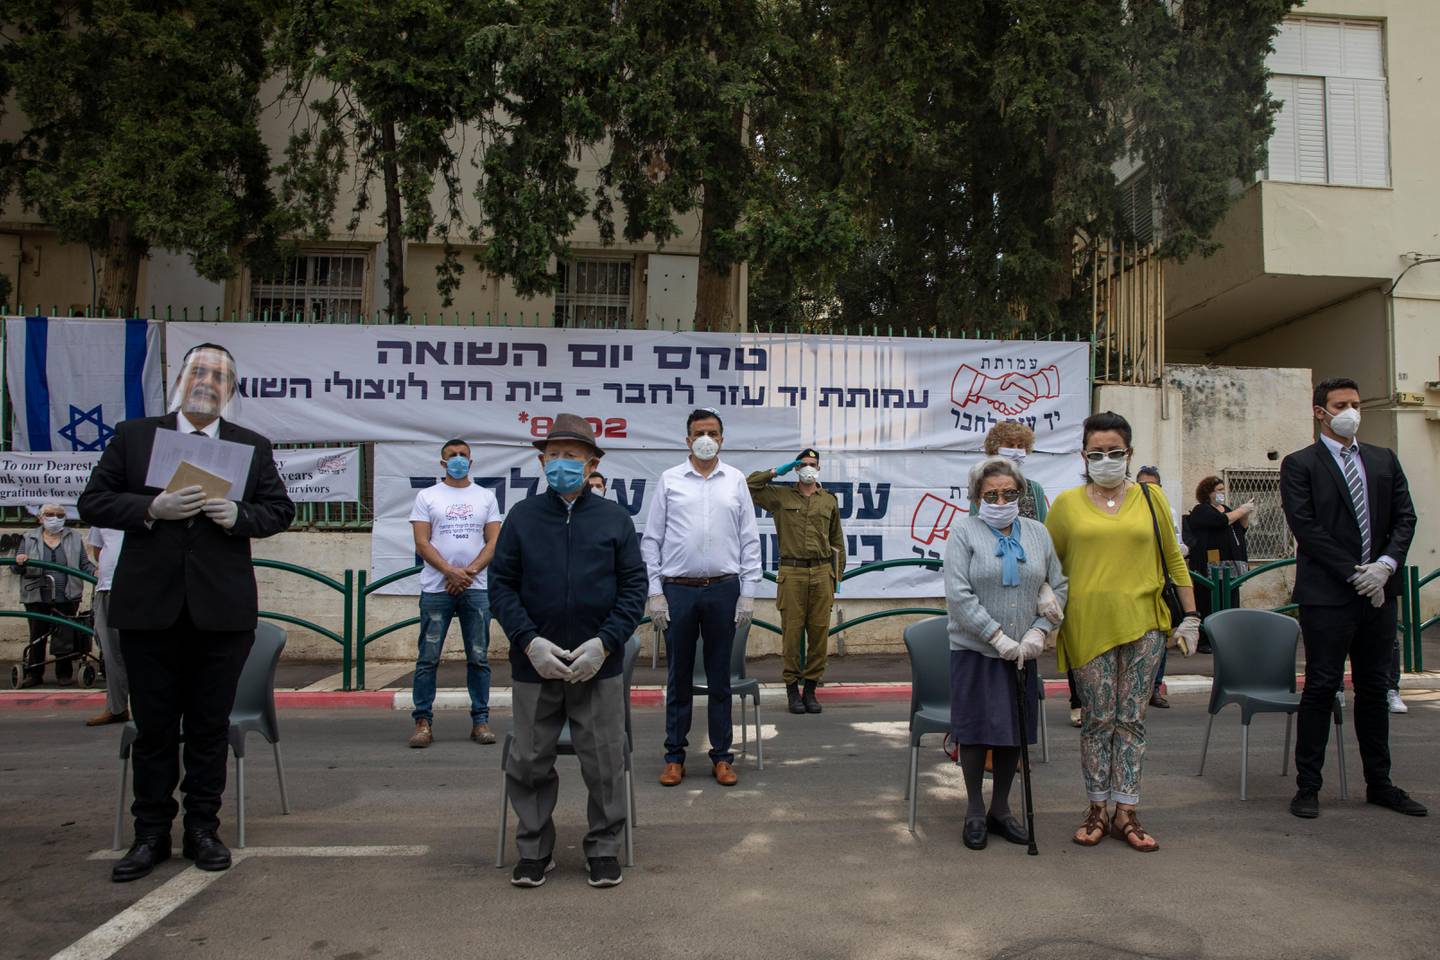 Holocaust survivor Shalom Stamberg, second left, and Holocaust survivor Miriam Linial, third right, wear a mask and keep a safe distance from others while the two-minute-long siren sounds during an annual Holocaust memorial ceremony held outside this year because of the coronavirus, in the northern Israeli city of Haifa, Israel, Tuesday, April 21, 2020. Stamberg, 97 and Linial, 99, both Holocaust survivors from Poland. The Hebrew sign reads "Holocaust memorial ceremony and Yad Ezer La-Haver foundation, warm home for Holocaust survivors". (AP Photo/Ariel Schalit)